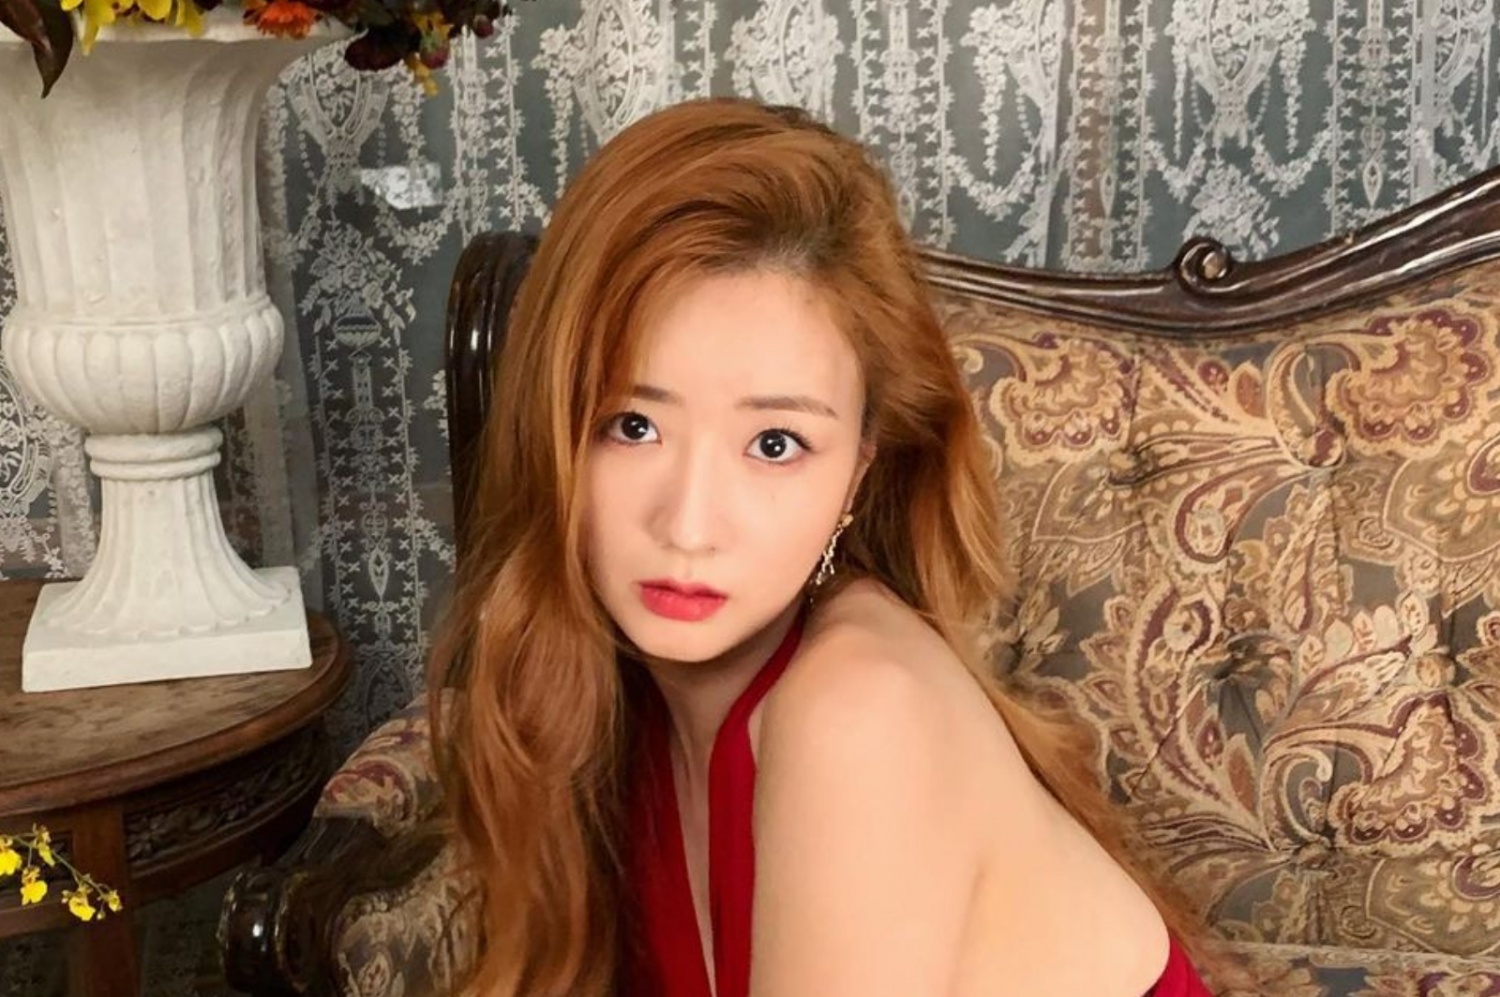 Apink Bomi reveals she has a friendship tattoo – but regrets getting it